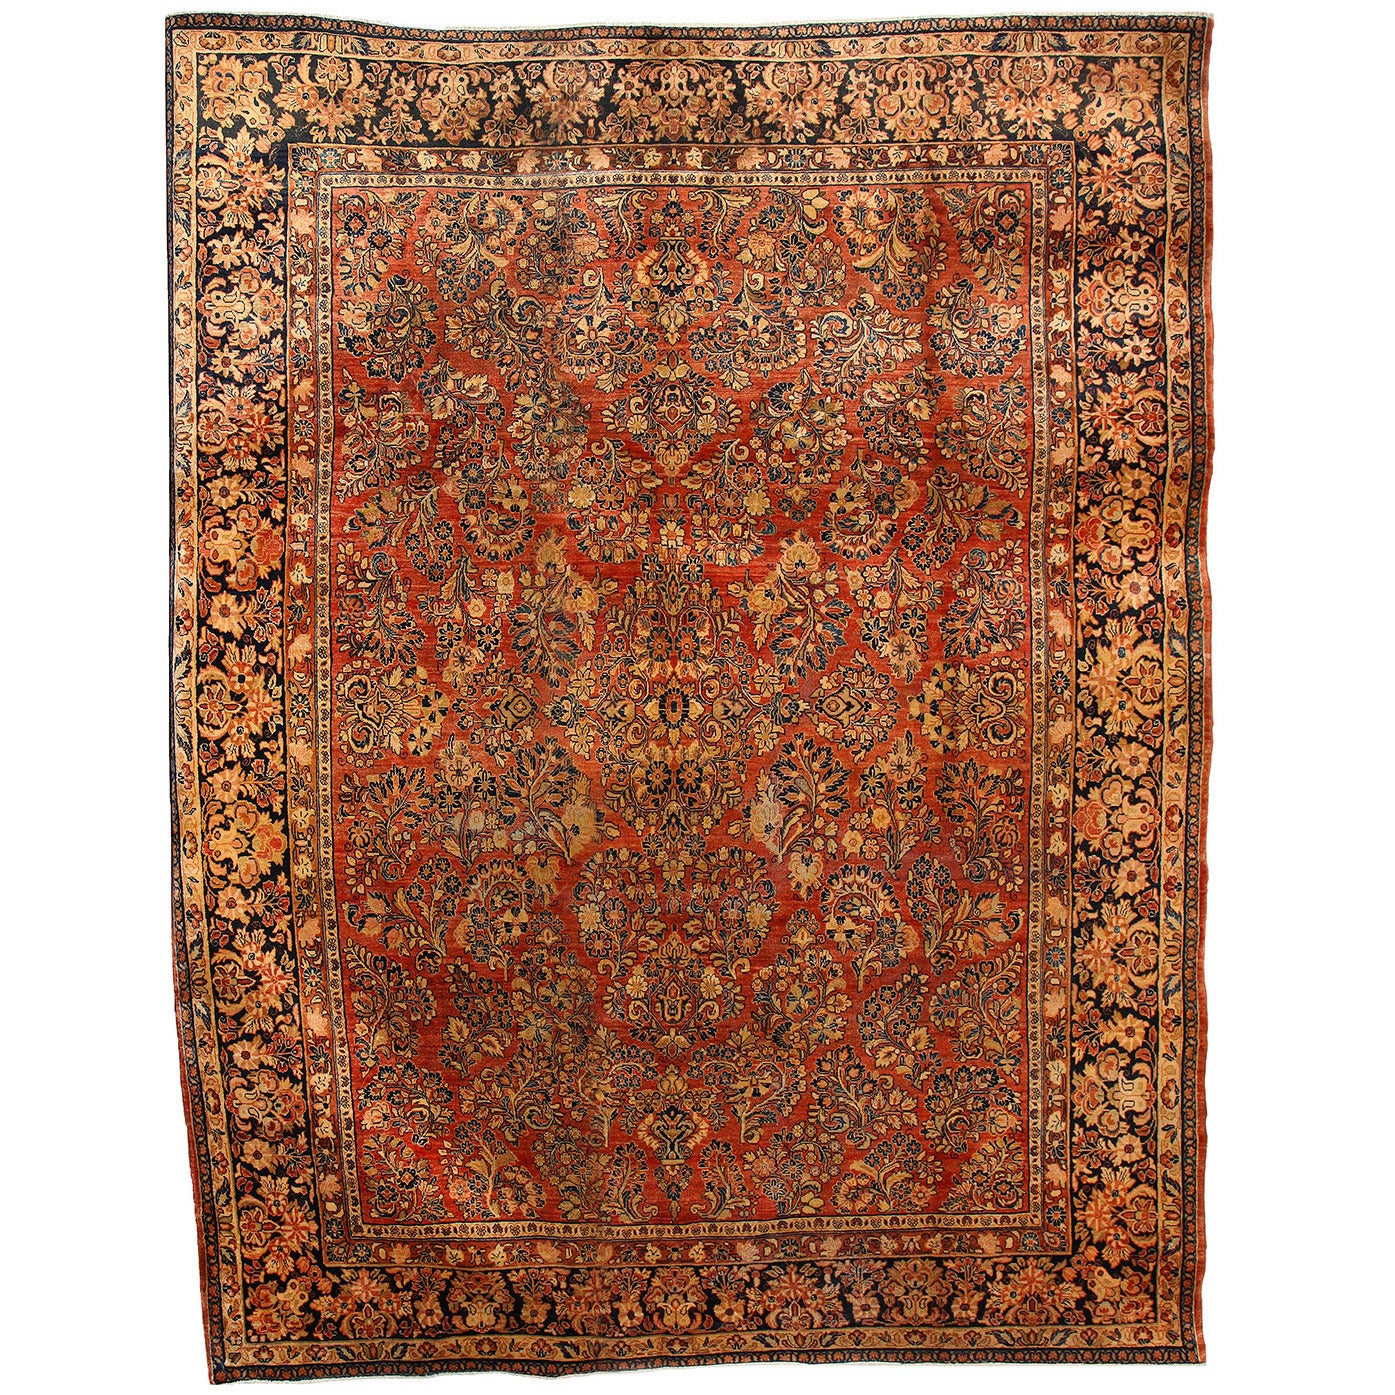 Persian Sarouk Carpet with Pure Wool Pile and Natural Vegetable Dyes, circa 1910